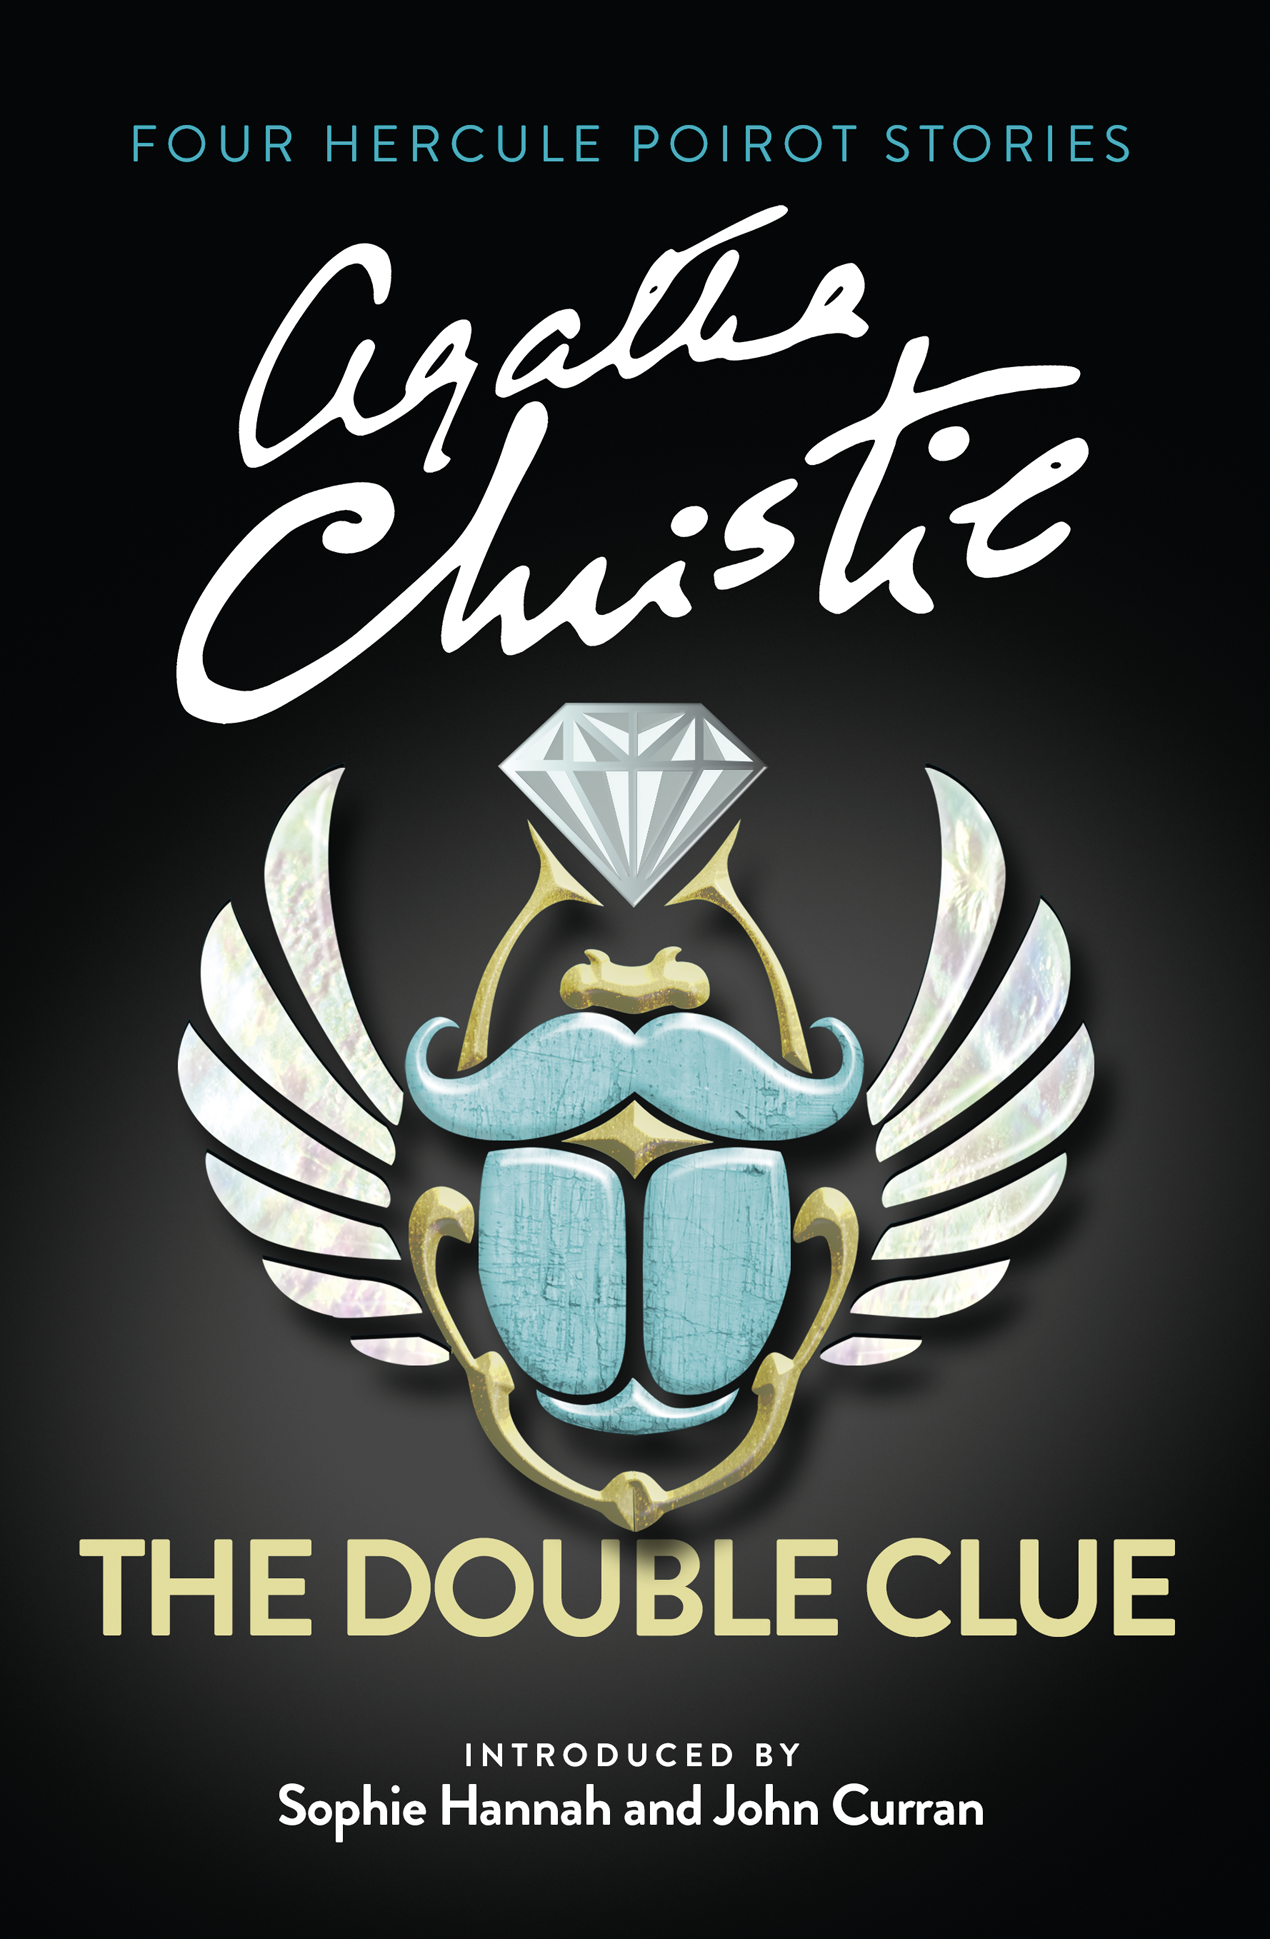 The Double Clue And Other Hercule Poirot Stories: Book by Agatha Christie